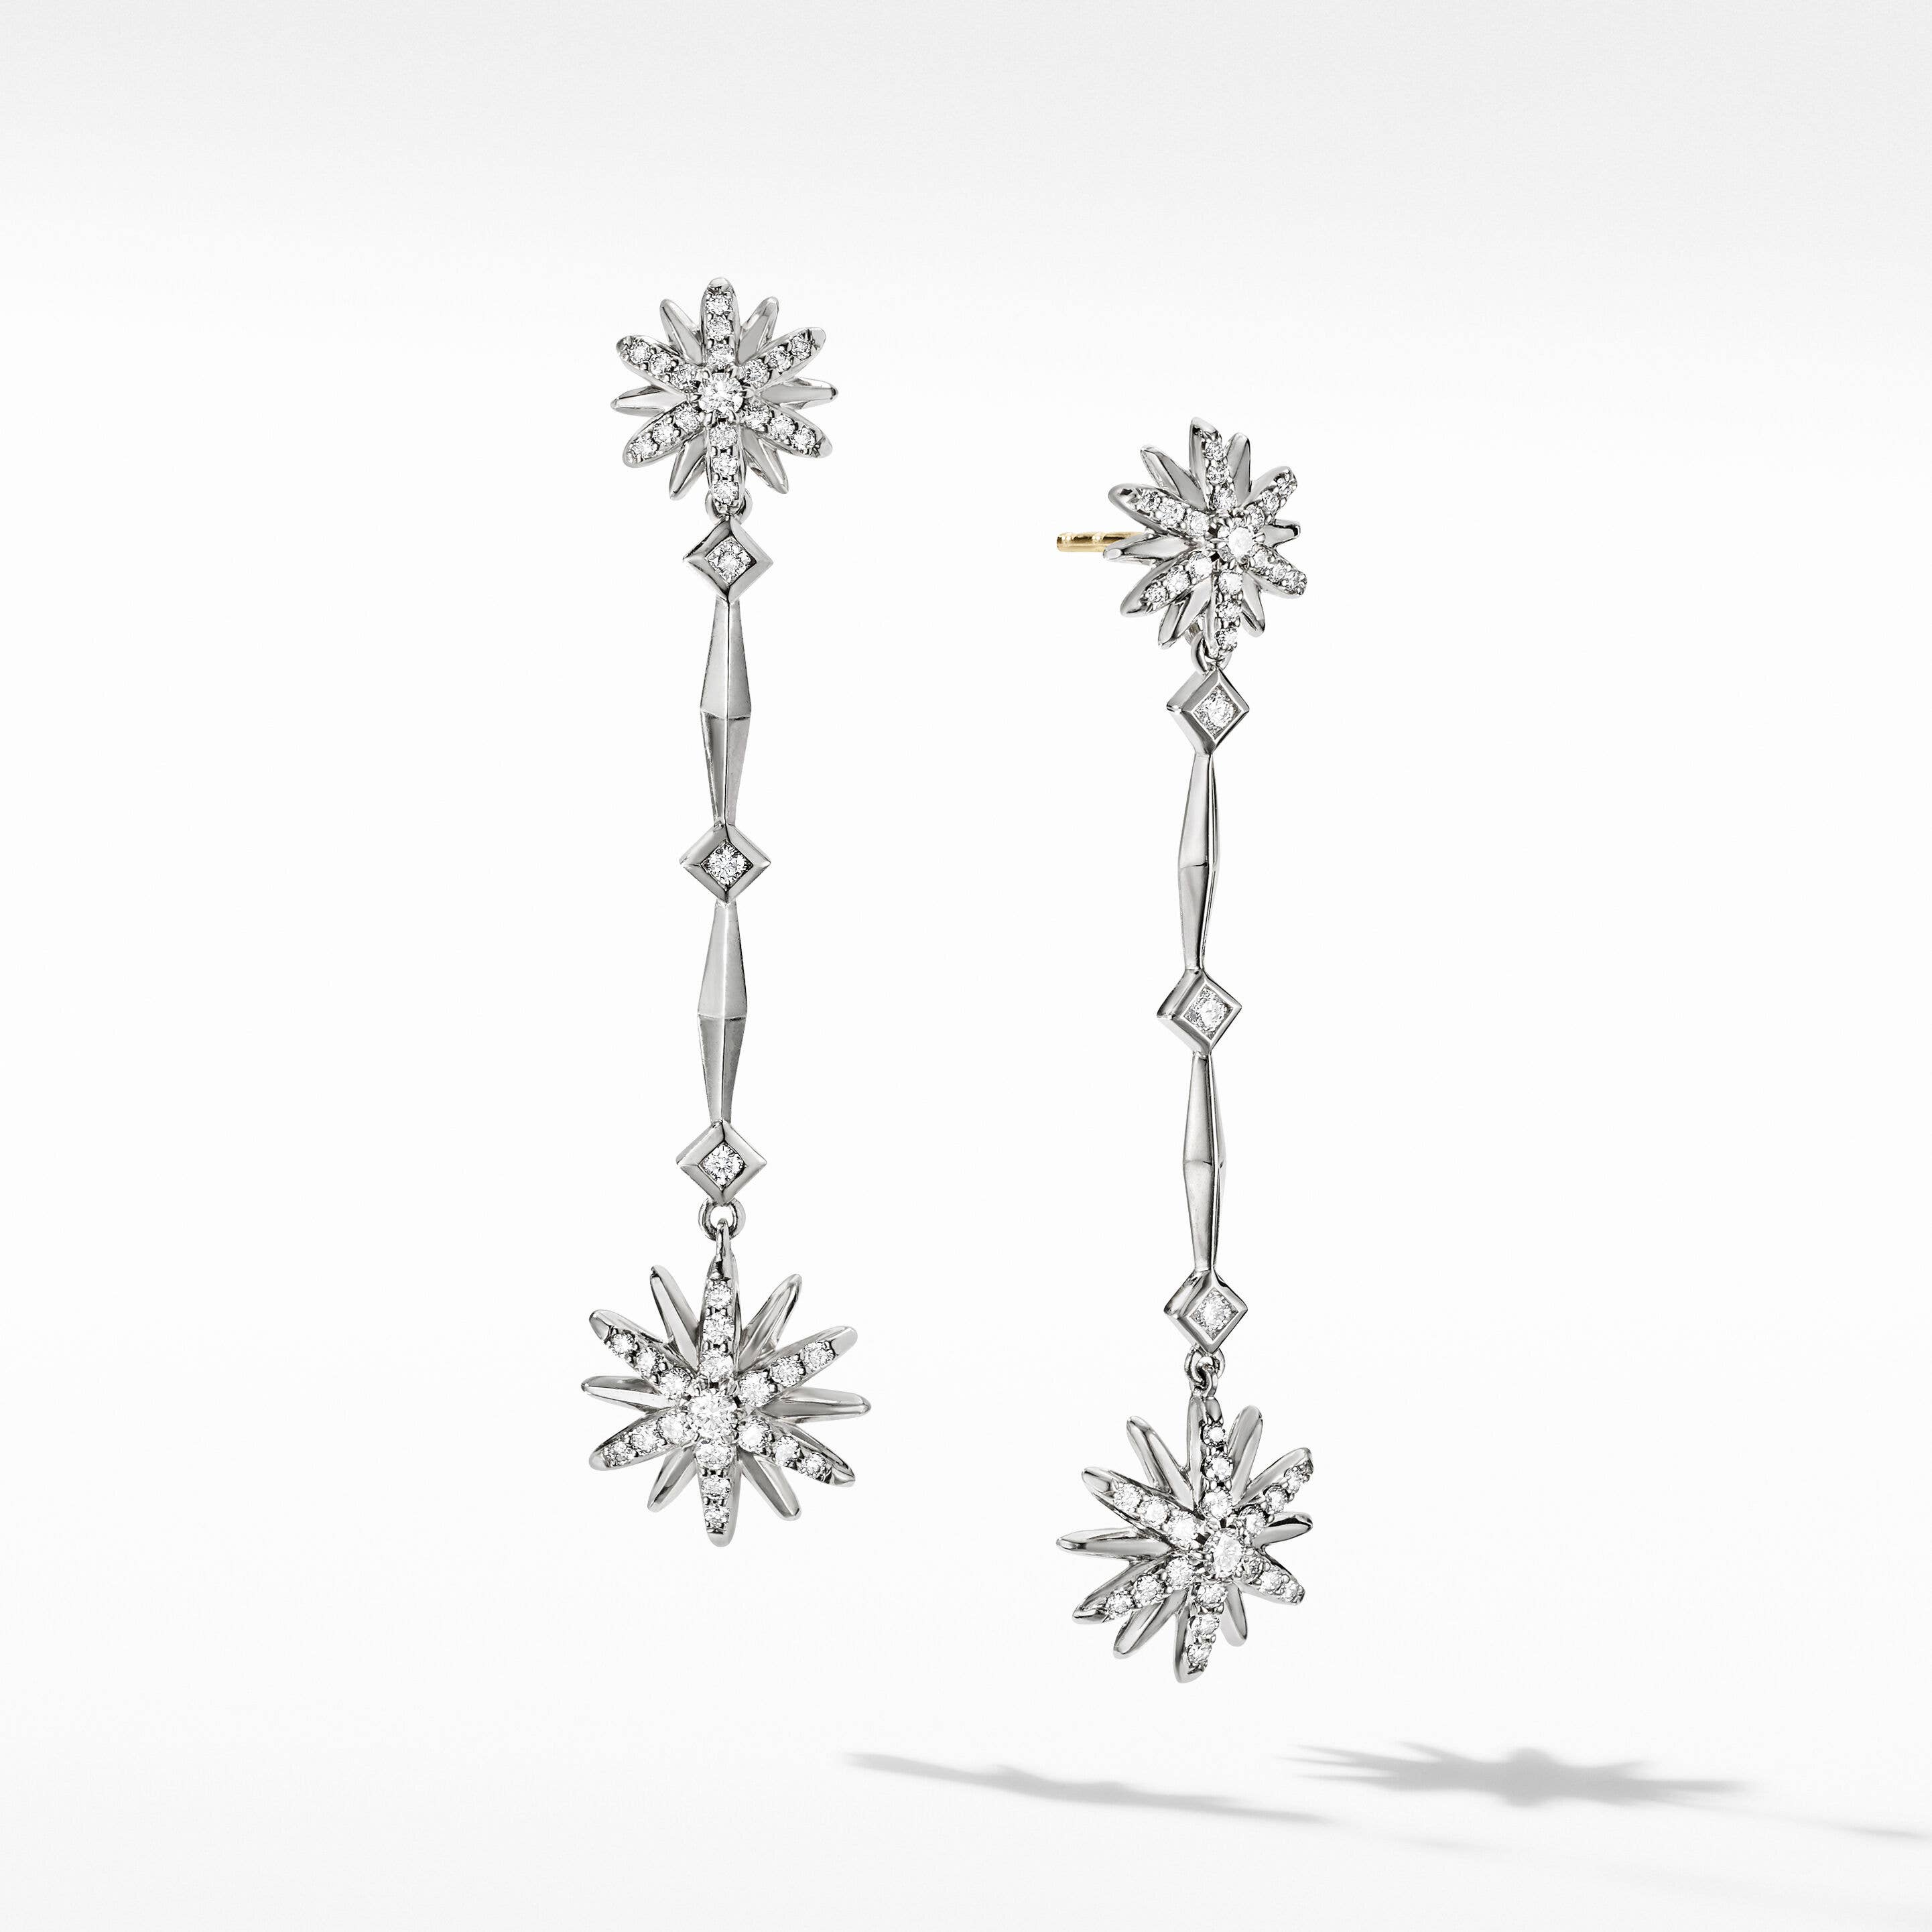 Starburst Stick Drop Earrings in Sterling Silver with Pavé Diamonds